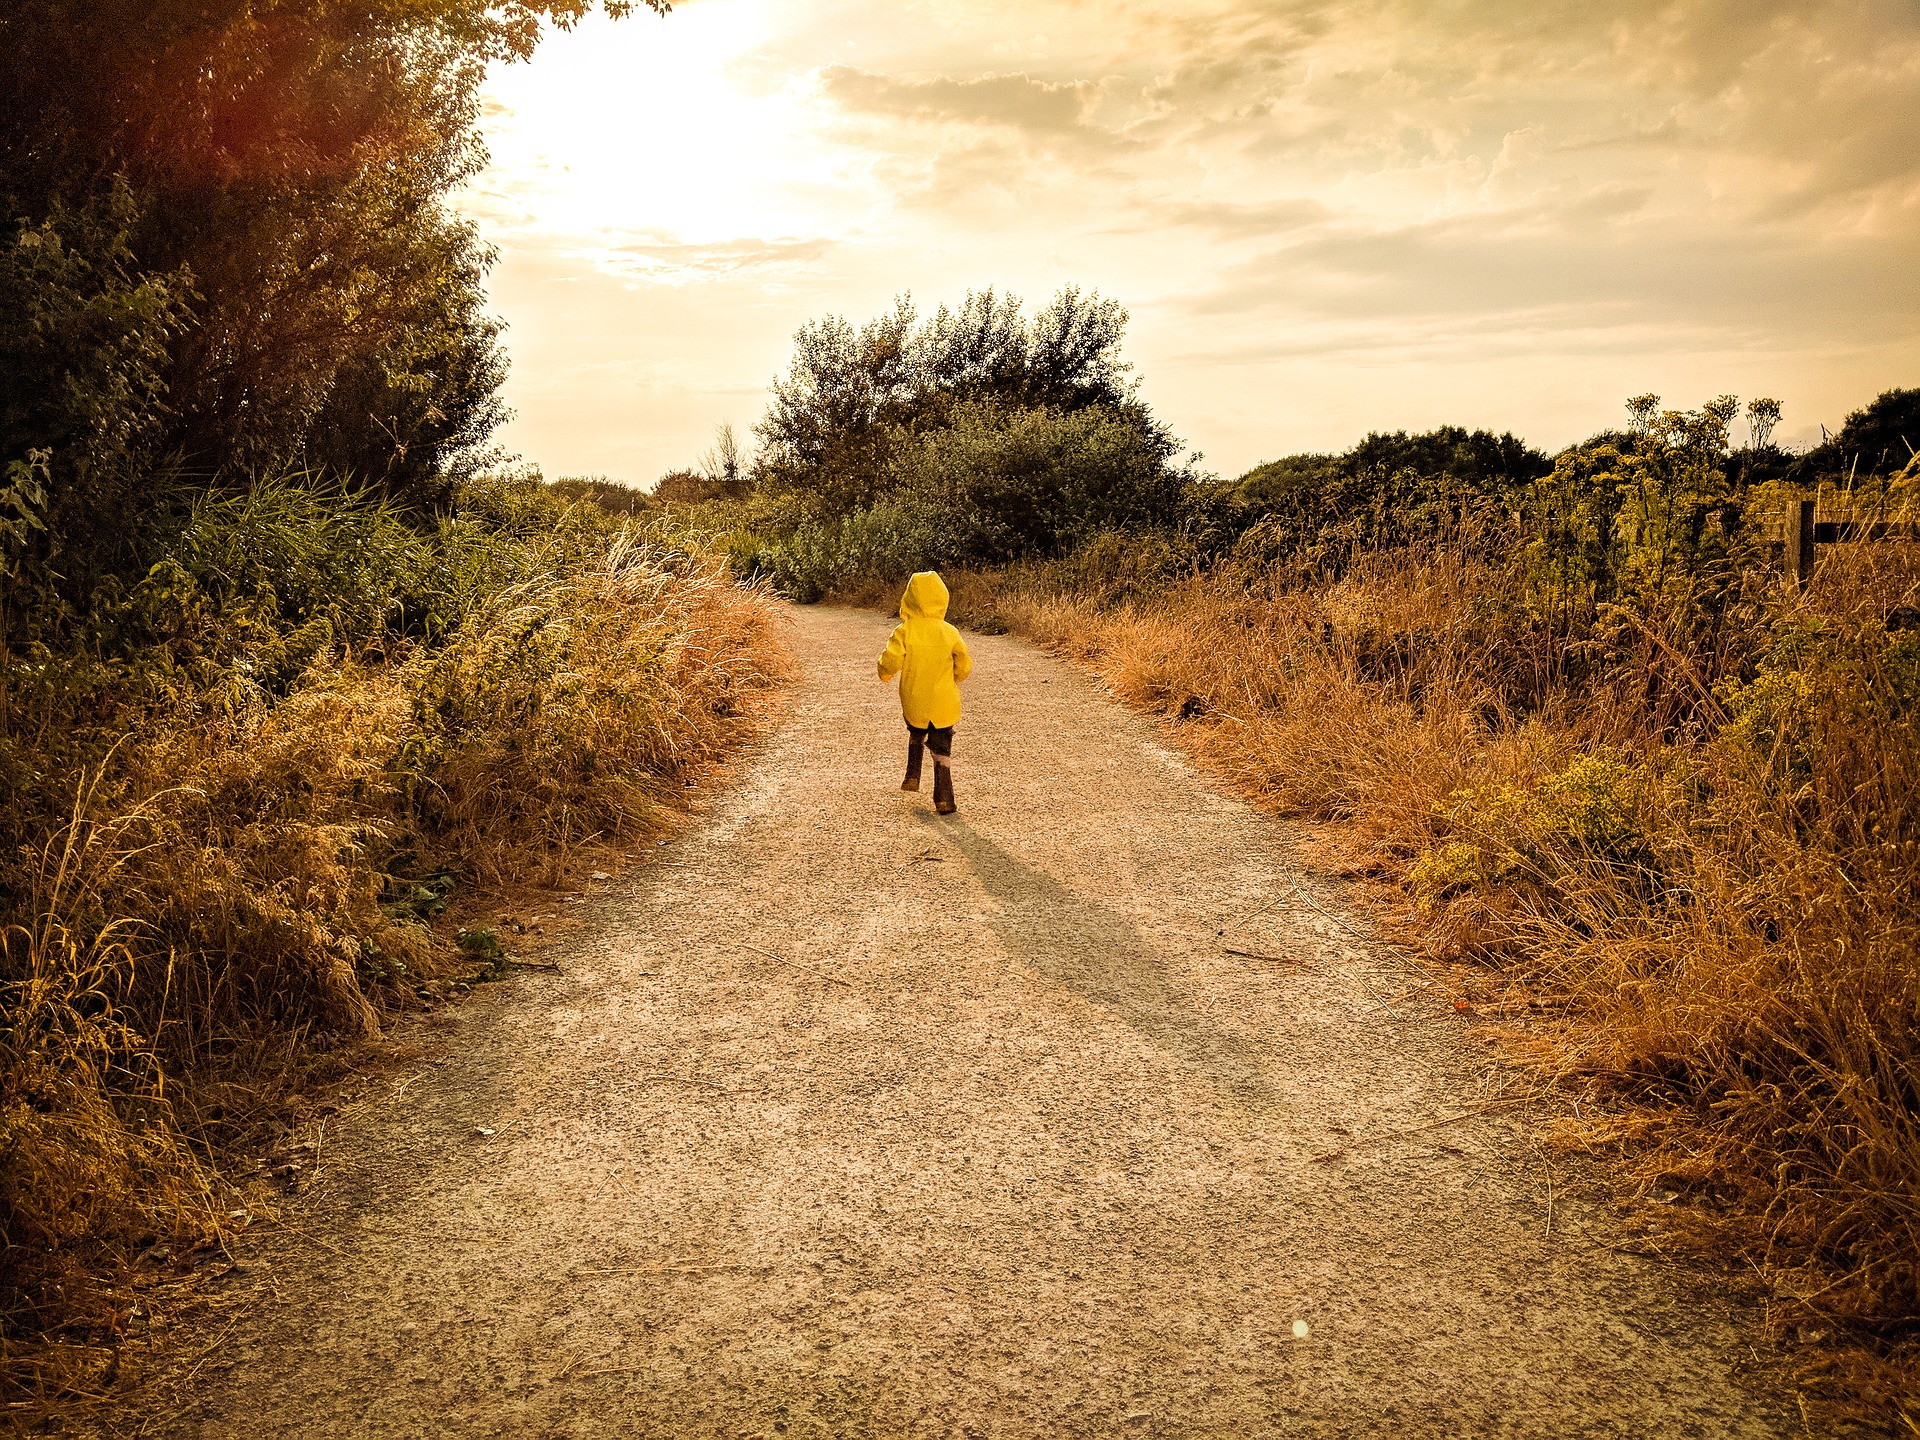 A child in a yellow raincoat runs down a road